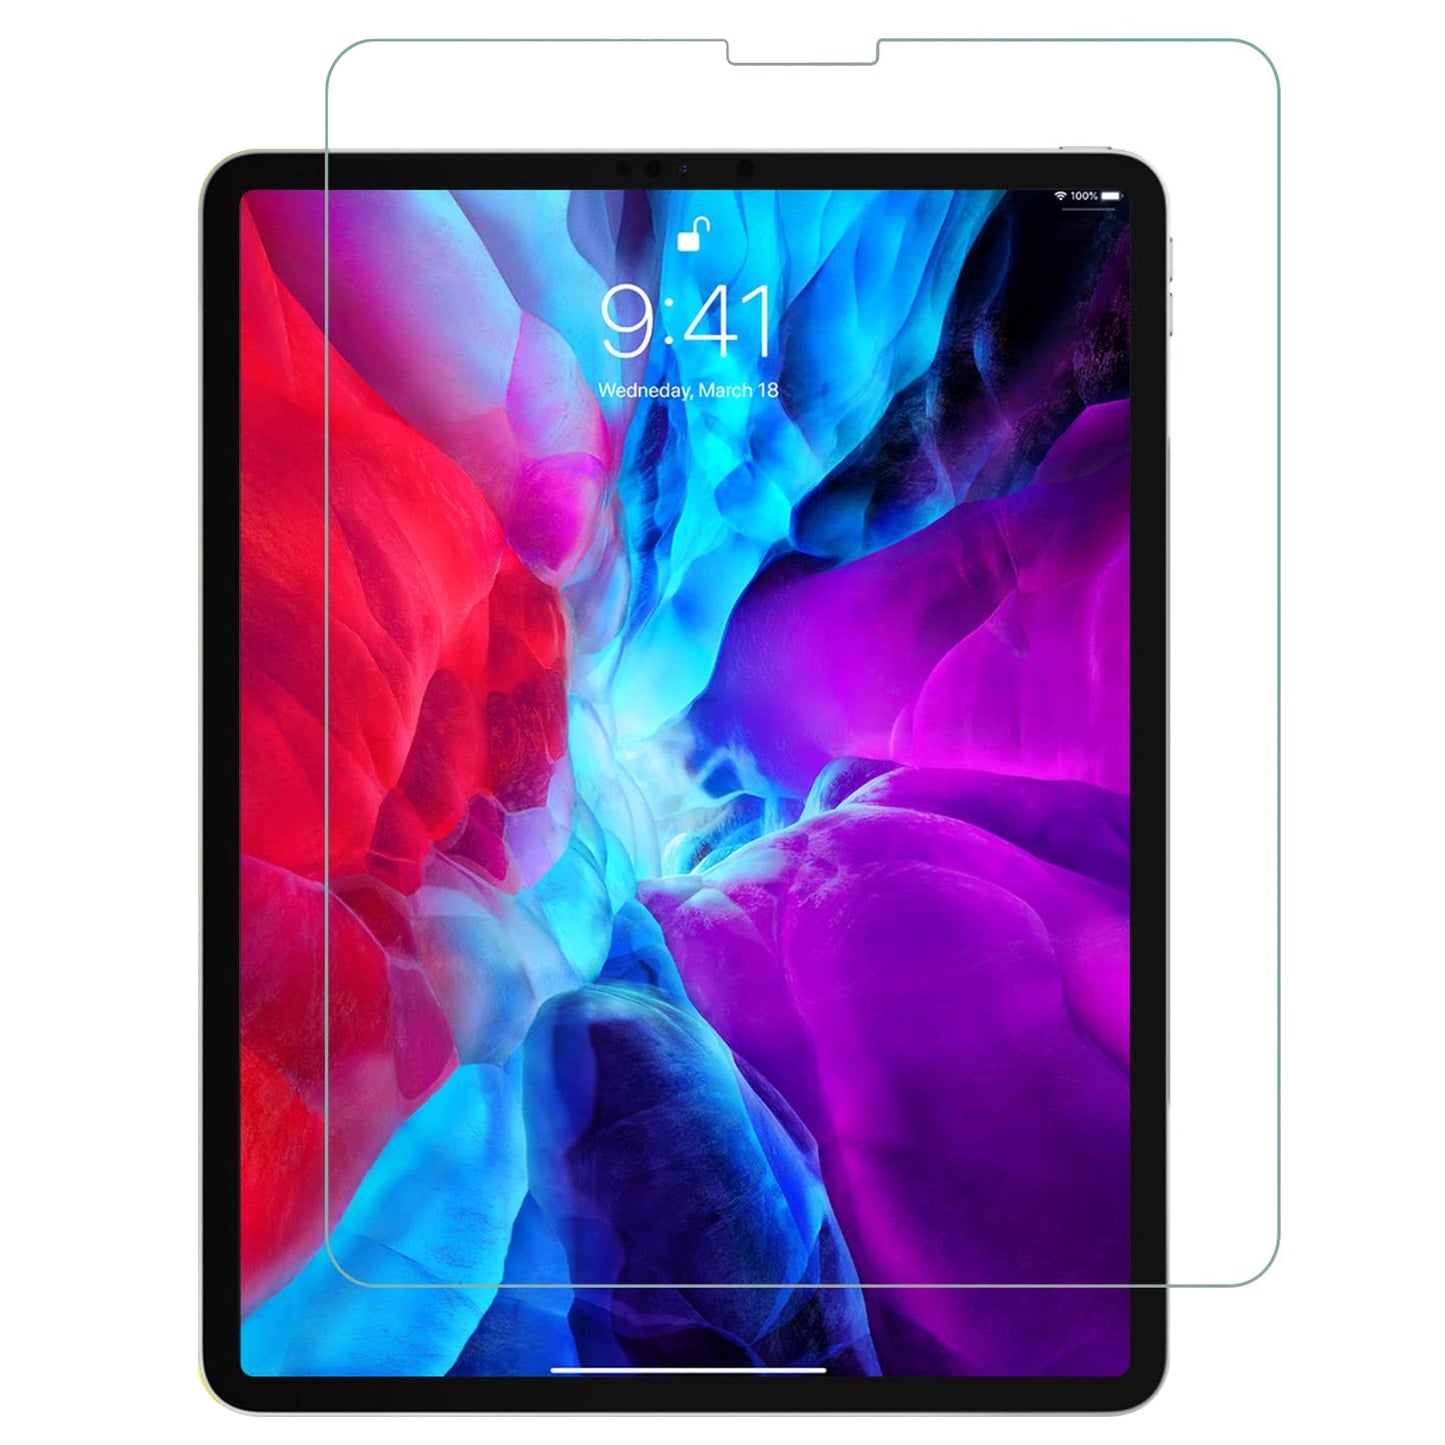 [3 Pack] MEZON Apple iPad Pro 12.9" 2020 Ultra Clear Film Case and Pencil Friendly Screen Protector (iPad Pro 12.9", Clear)